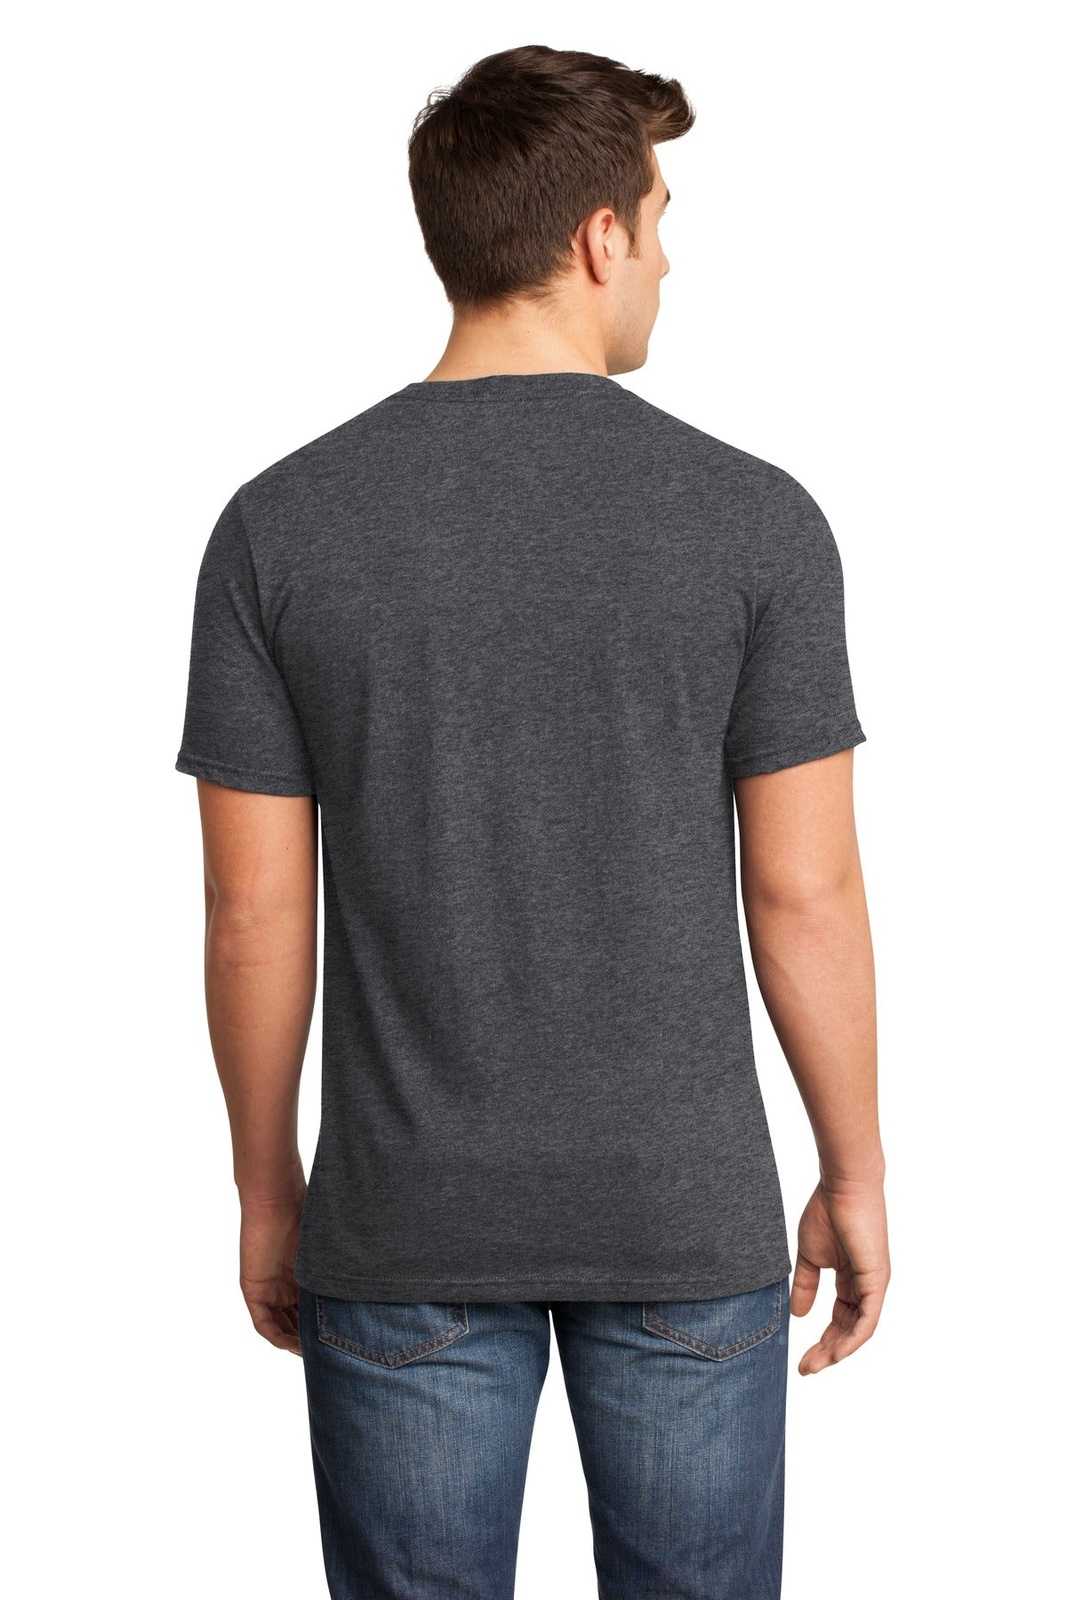 District DT6500 Very Important Tee V-Neck - Heathered Charcoal - HIT a Double - 2